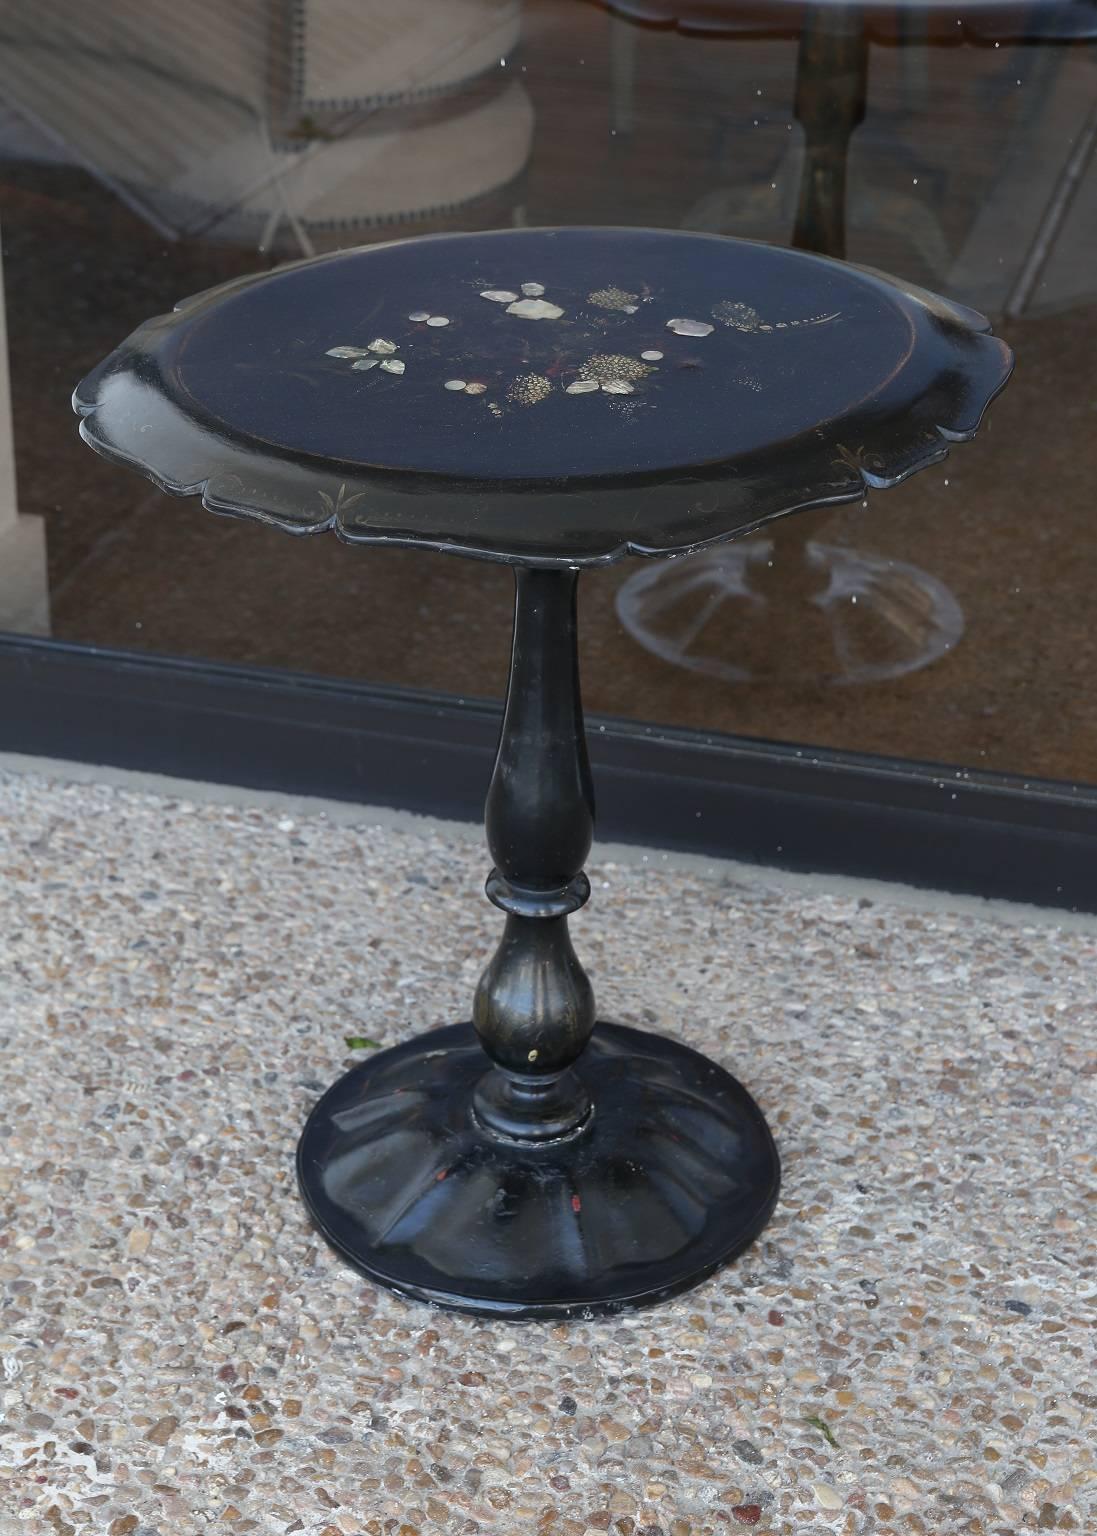 English papier-mâché (papier mâché) table, inlaid with mother-of-pearl floral decoration, with original black lacquer and polychrome painted finish, scalloped oval tilt-top and baluster and ring turned pedestal base.